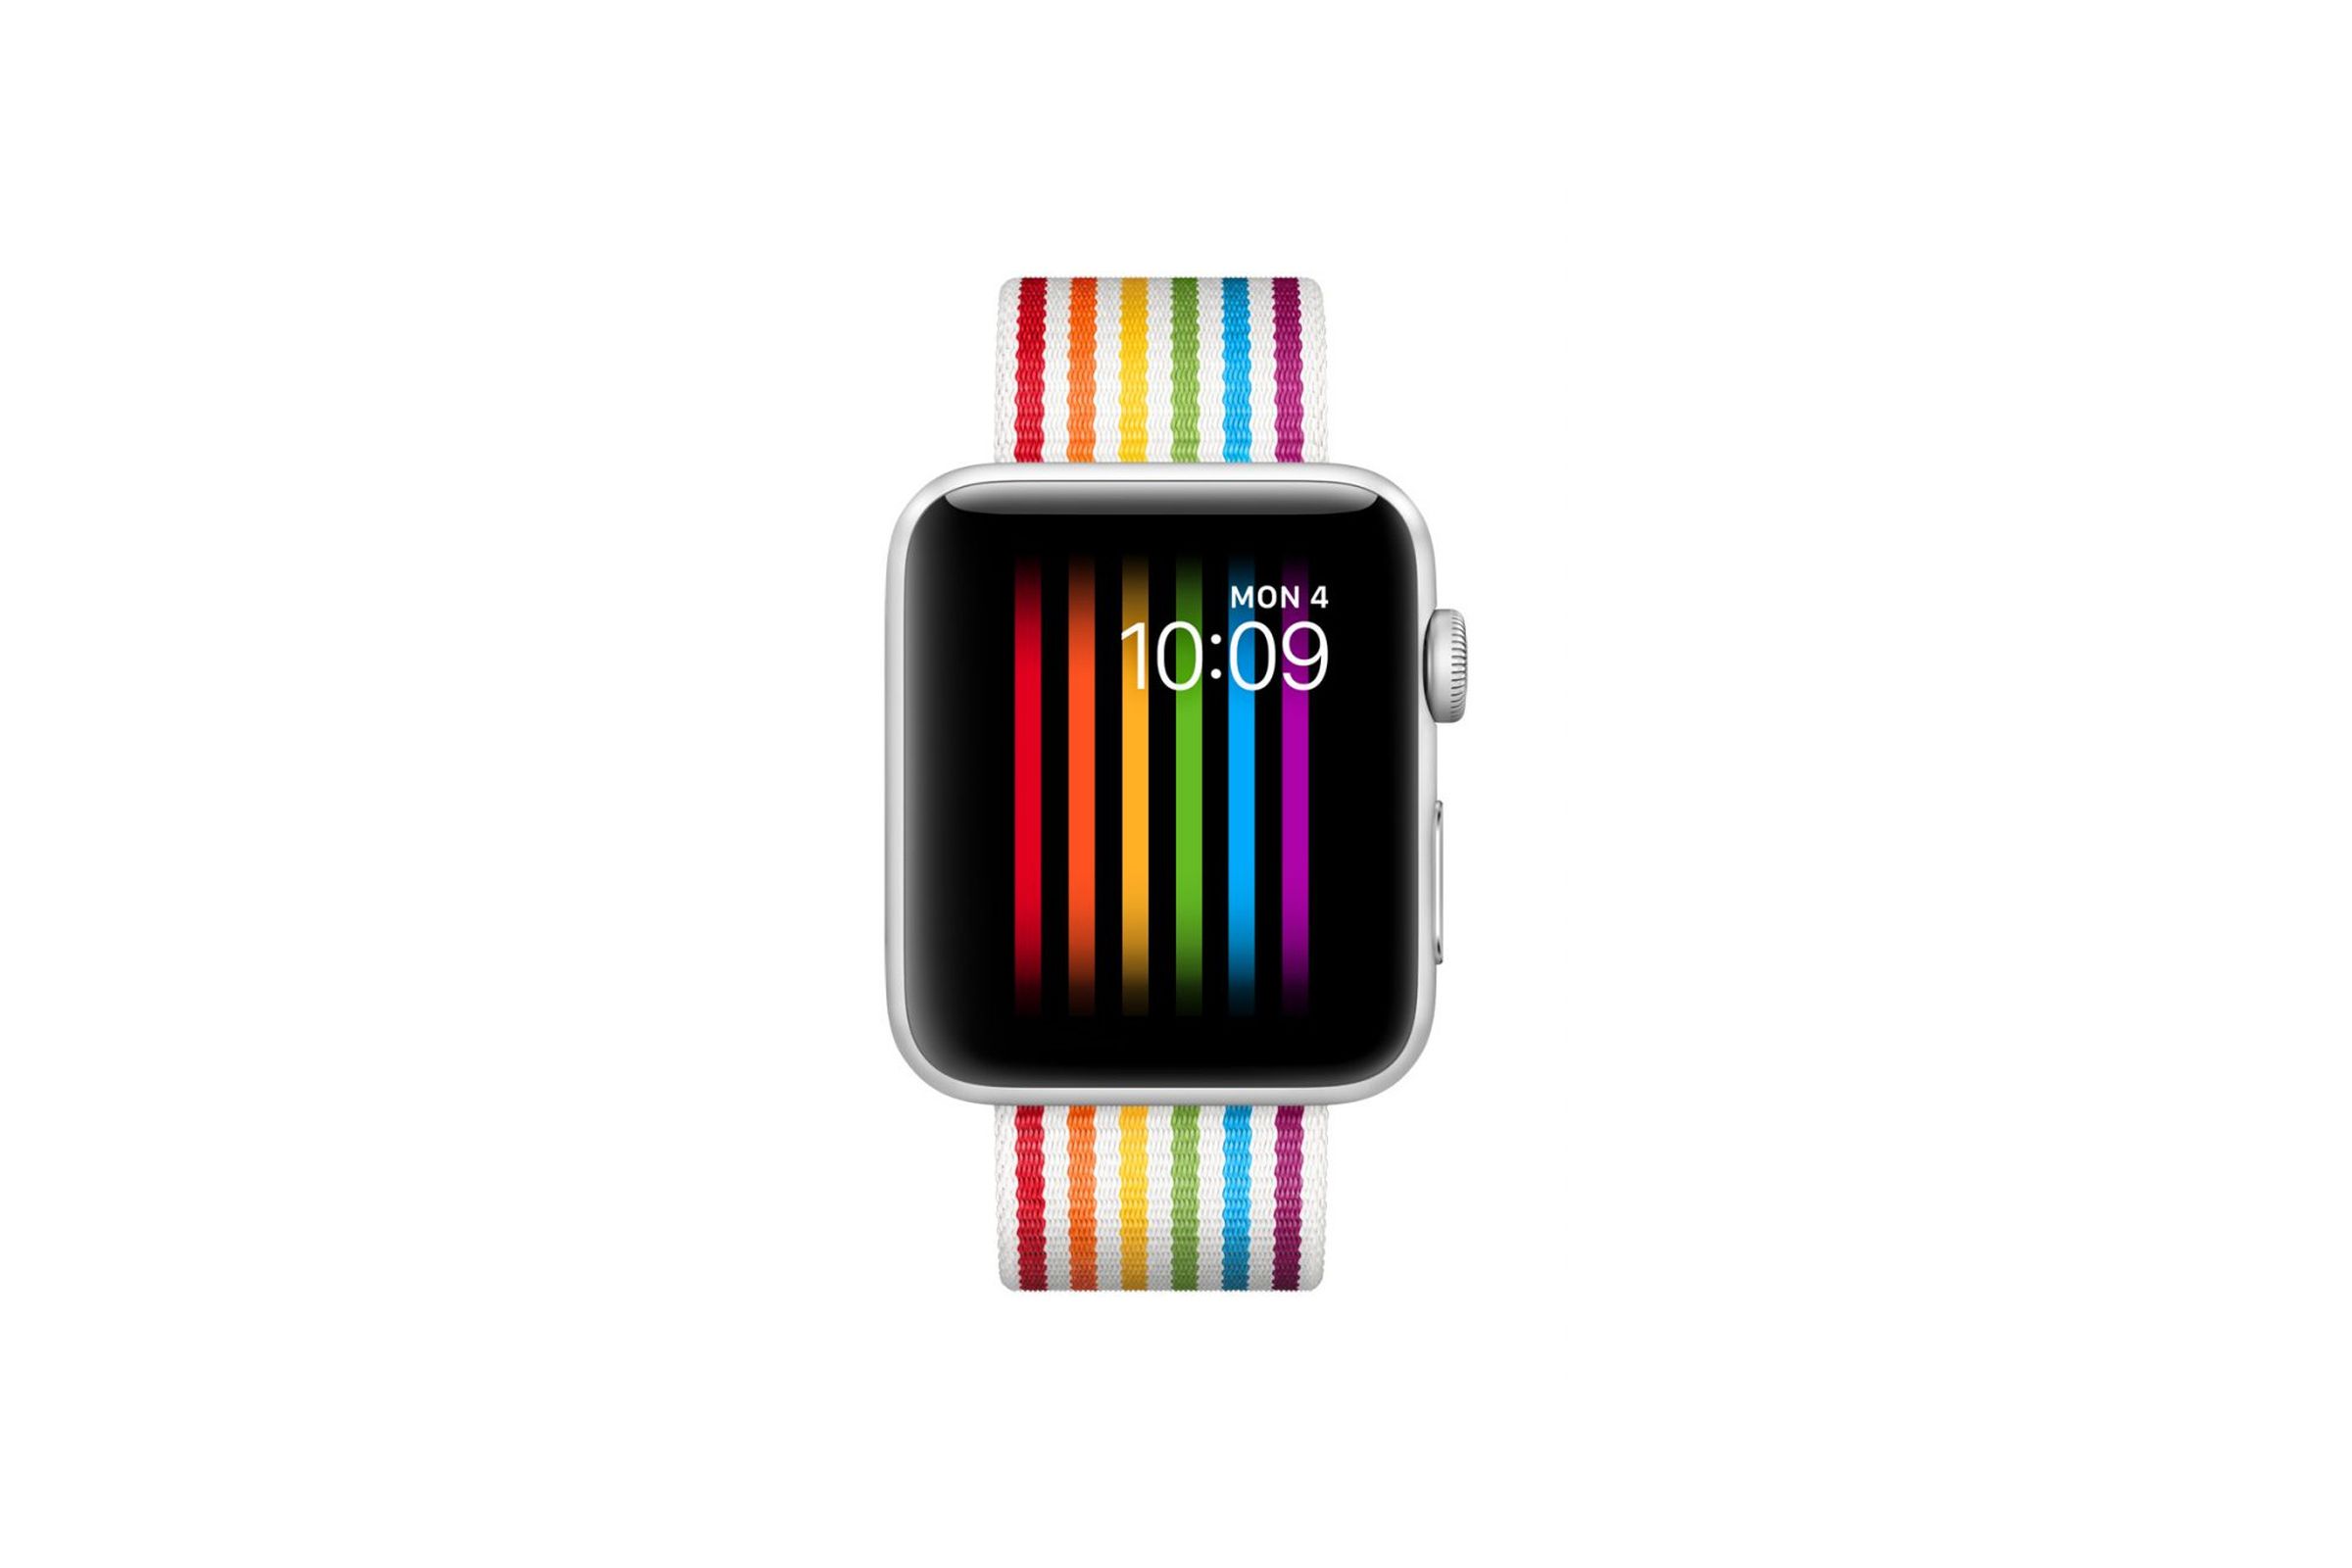 Apple’s pride watch face